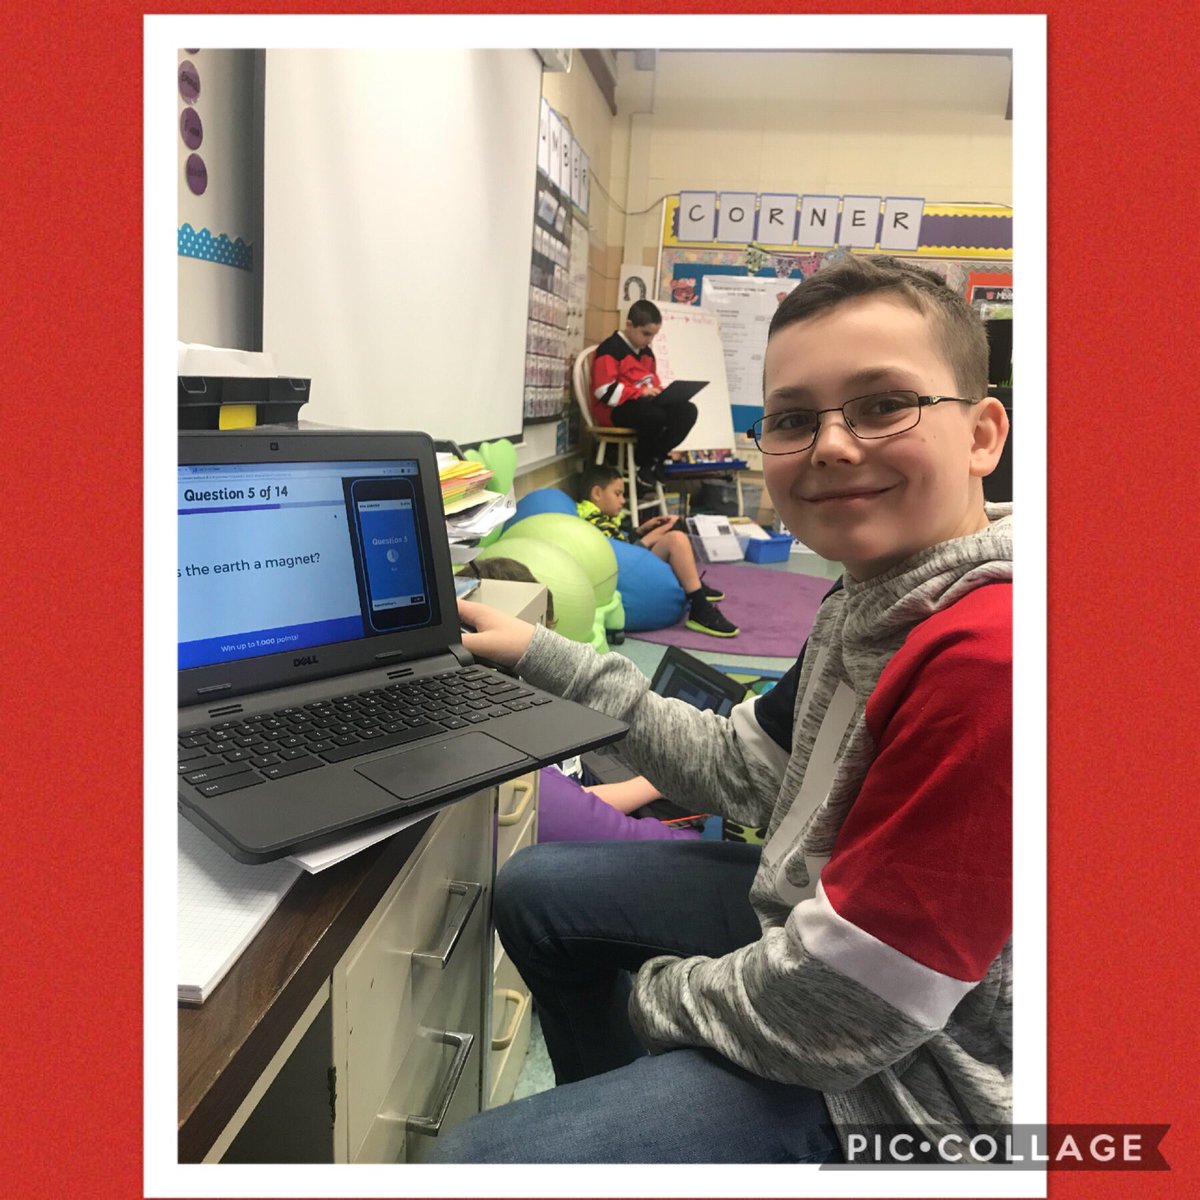 This SuperKid is showing me his 14 Question @GetKahoot he created all about nature all on his own! He used information from a nature magazine he read the other day ☺️ #AlwaysCreating #AlwaysLearning @CatenaColts @jjcbennett @CatenaPrincipal